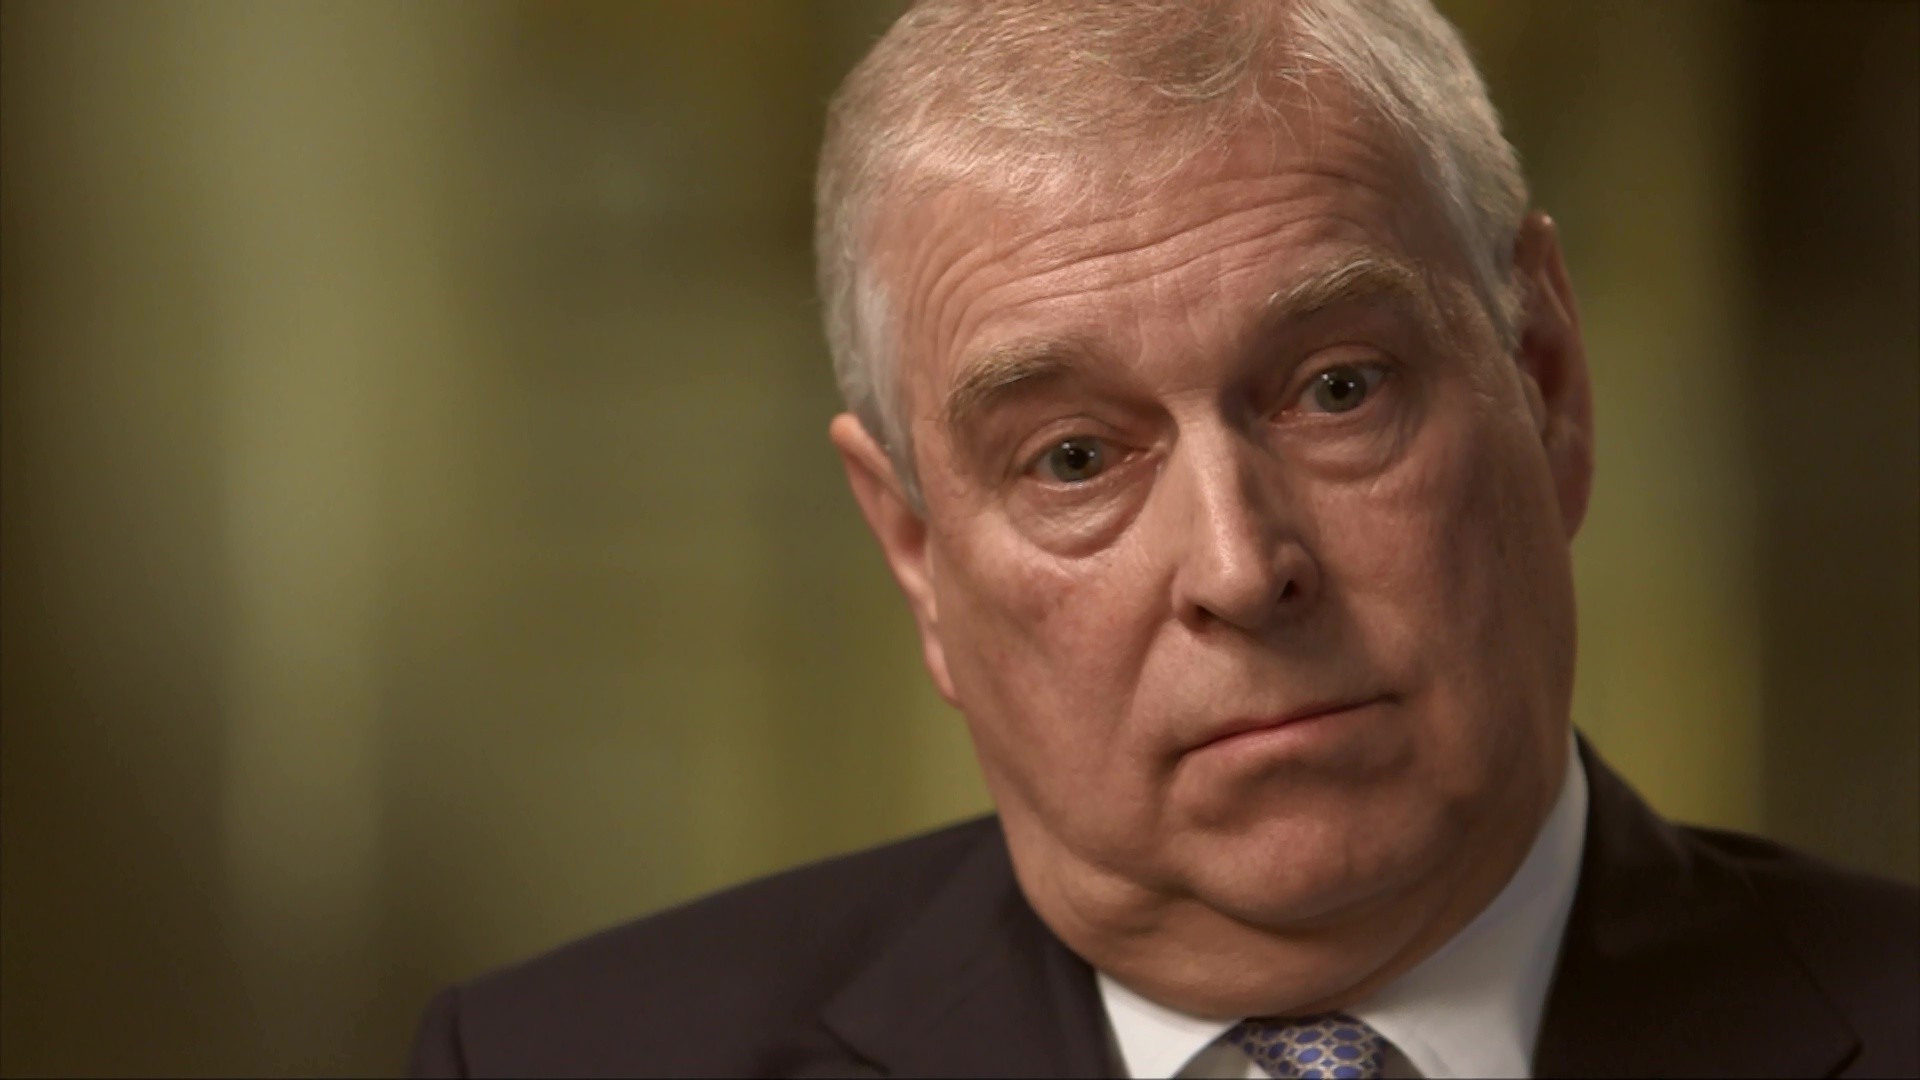 Prince Andrew denied any knowledge of, or involvement with, Epstein's alleged abuse during a car crash BBC Newsnight interview